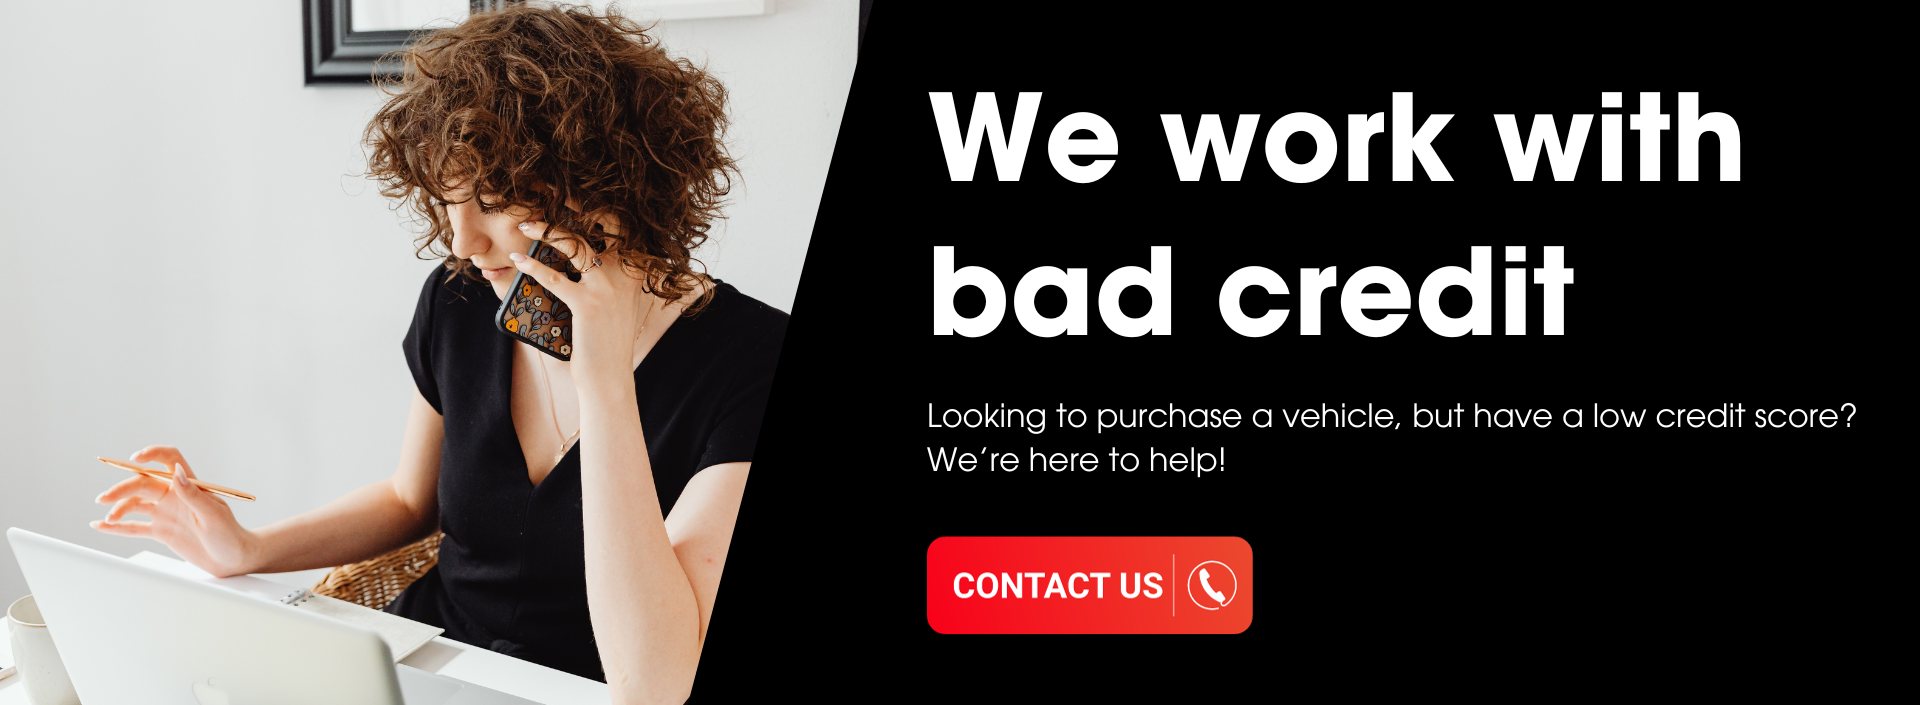 we work with bad credit